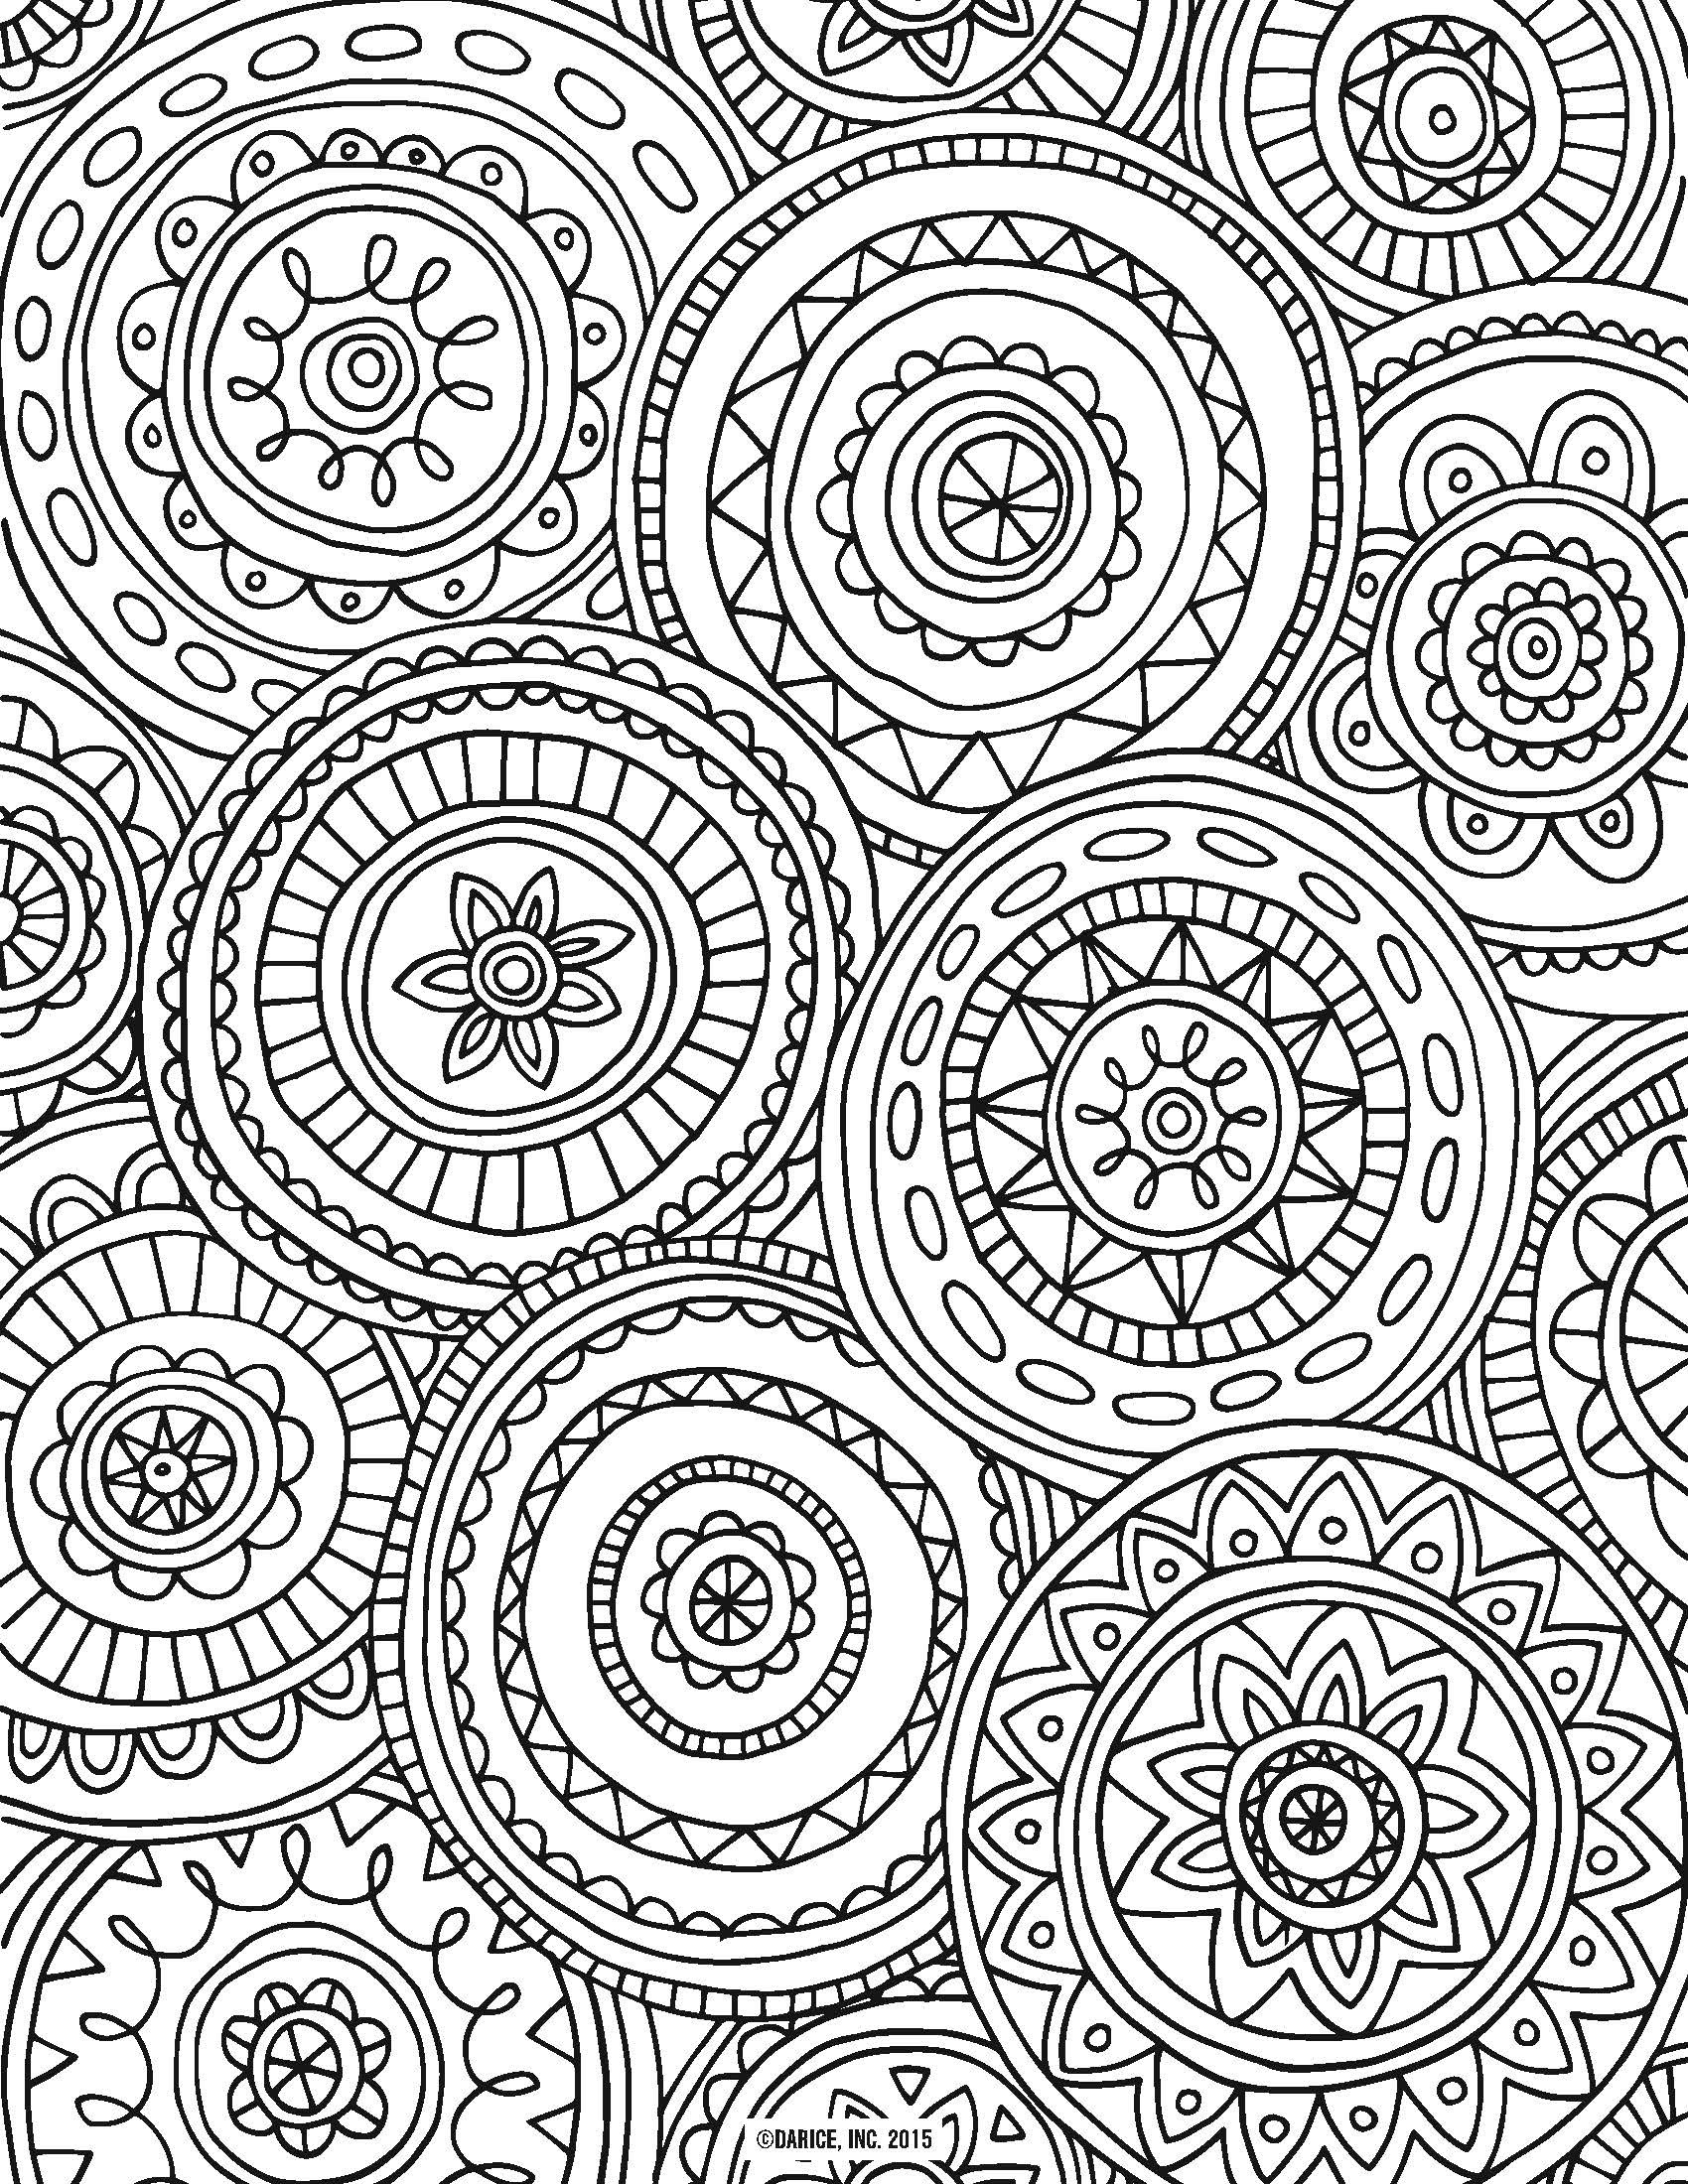 coloring books : Printable Colouring Patterns Awesome Free Adult Coloring  Pages Patterns Download Free Clip Art Printable Colouring Patterns ~  bringing